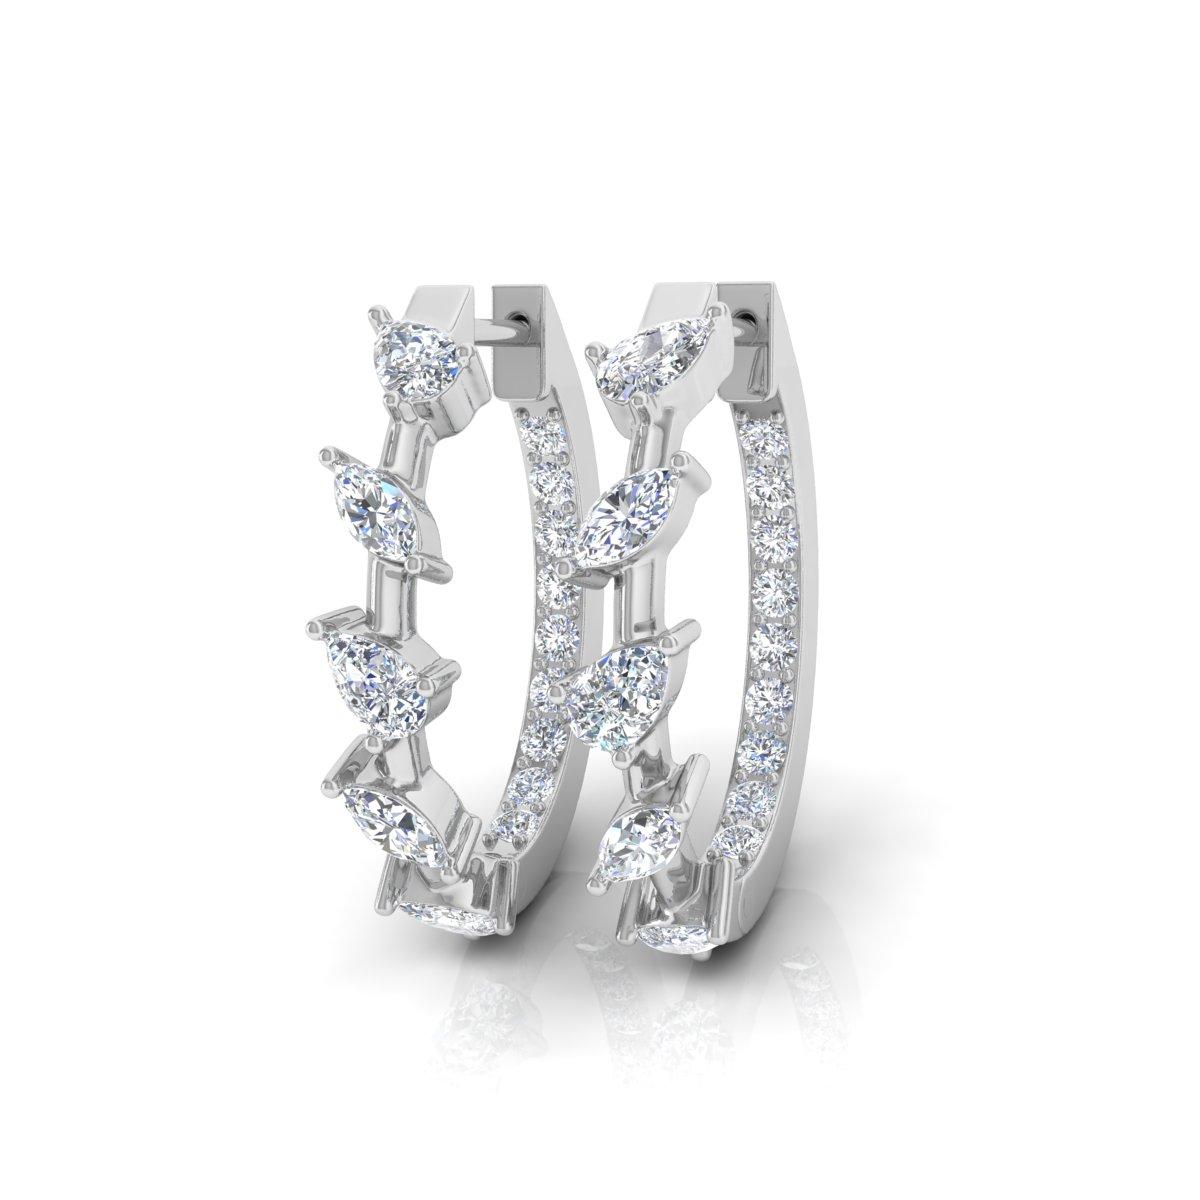 1.18 Carat Diamond Pave Huggies Hoop Earrings Solid 10k White Gold Fine Jewelry For Sale 3